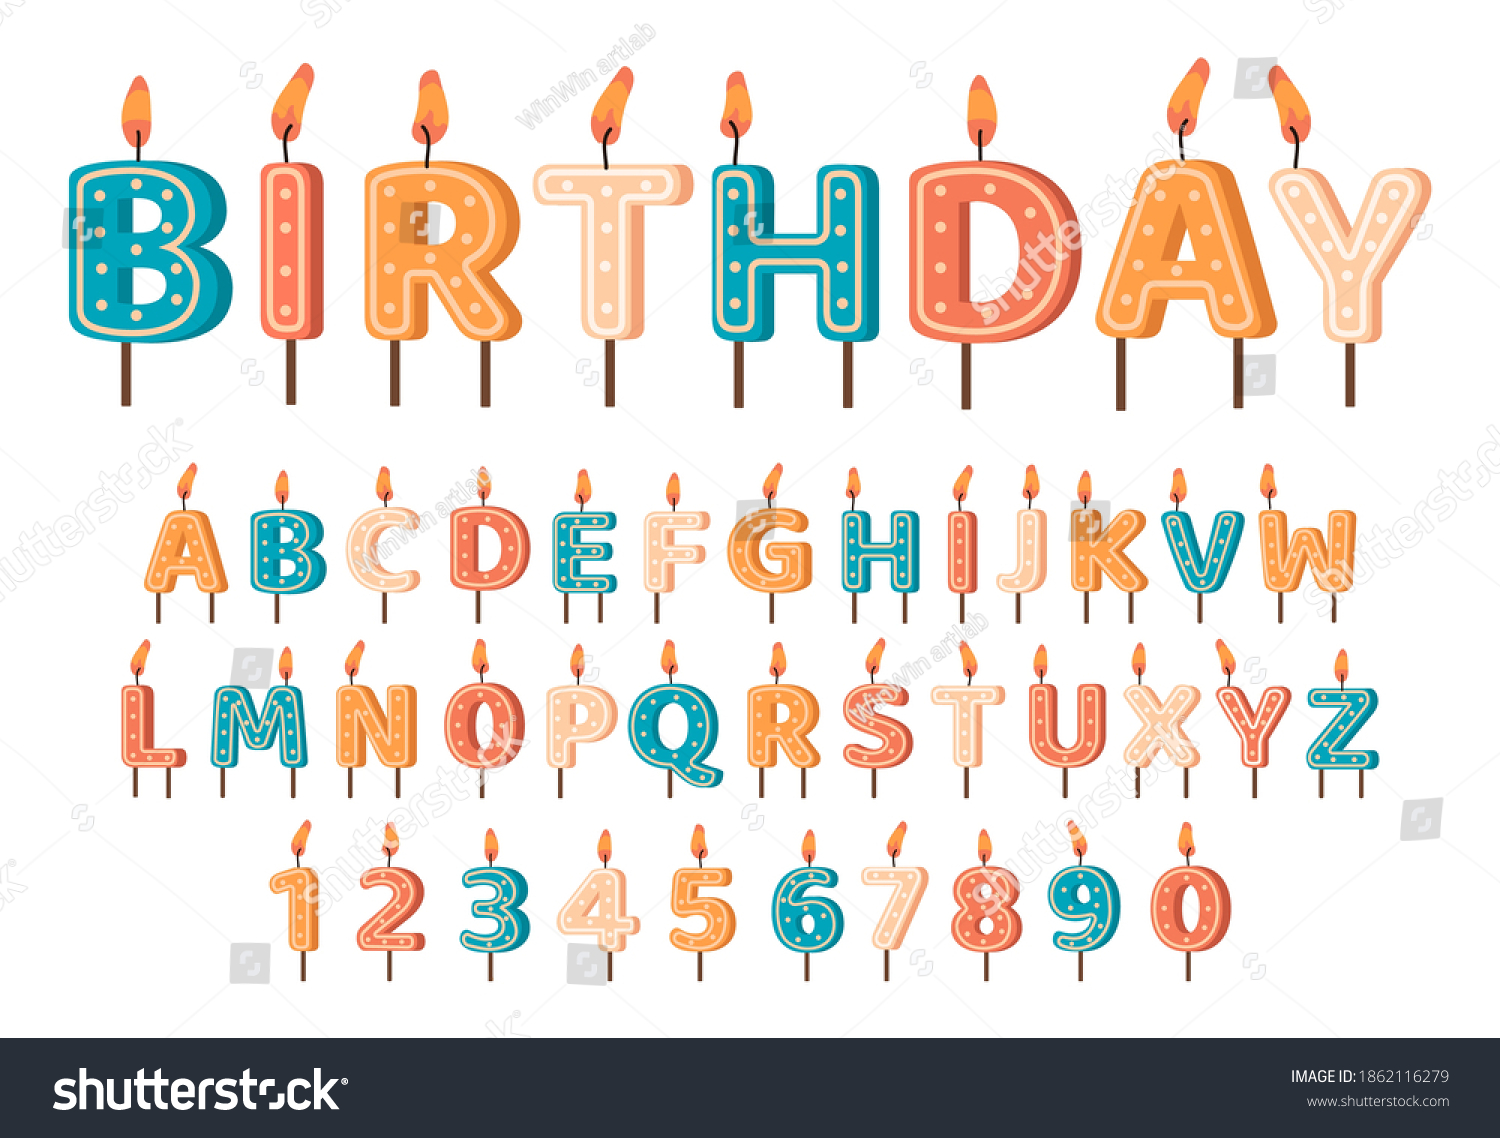 SVG of Candles birthday alphabet. Birthday candles ABC letters and numbers, cute alphabet for birthday cake. Birthday candles font vector symbols set. Decoration for cake on holiday celebration svg